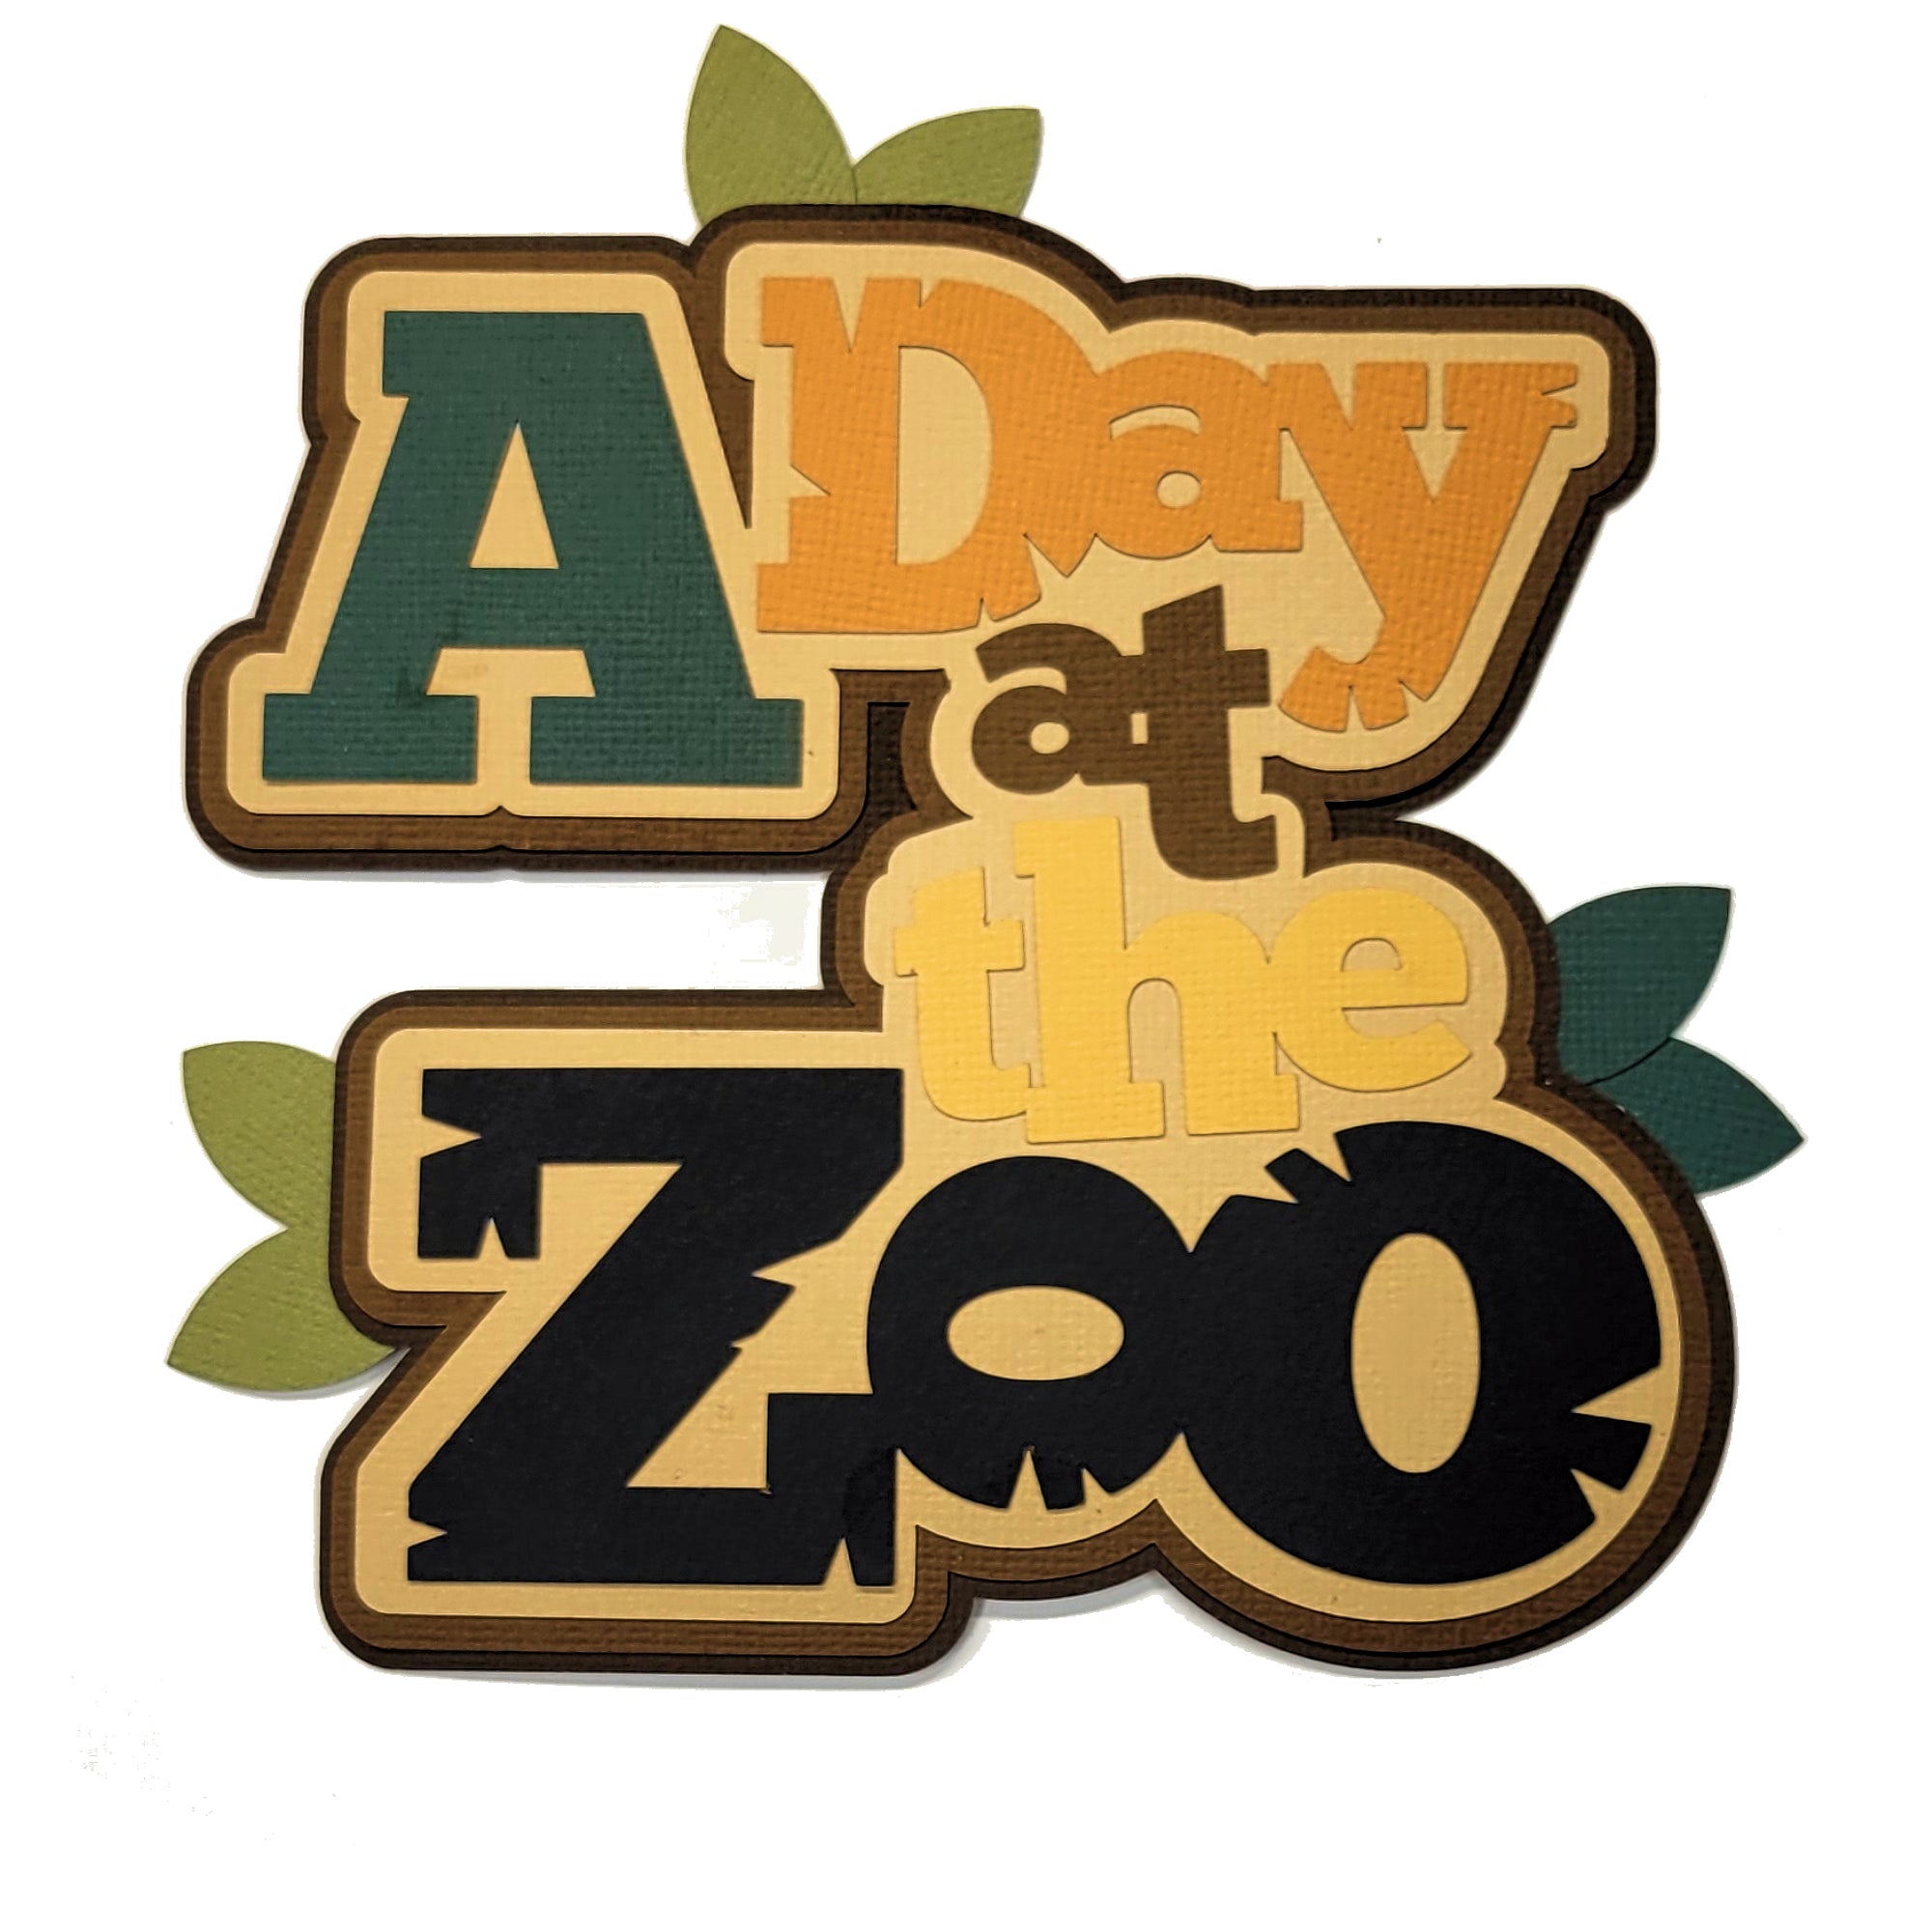 A Day At The Zoo Title 6.5 x 6.25  Fully-Assembled Laser Cut Scrapbook Embellishment by SSC Laser Designs